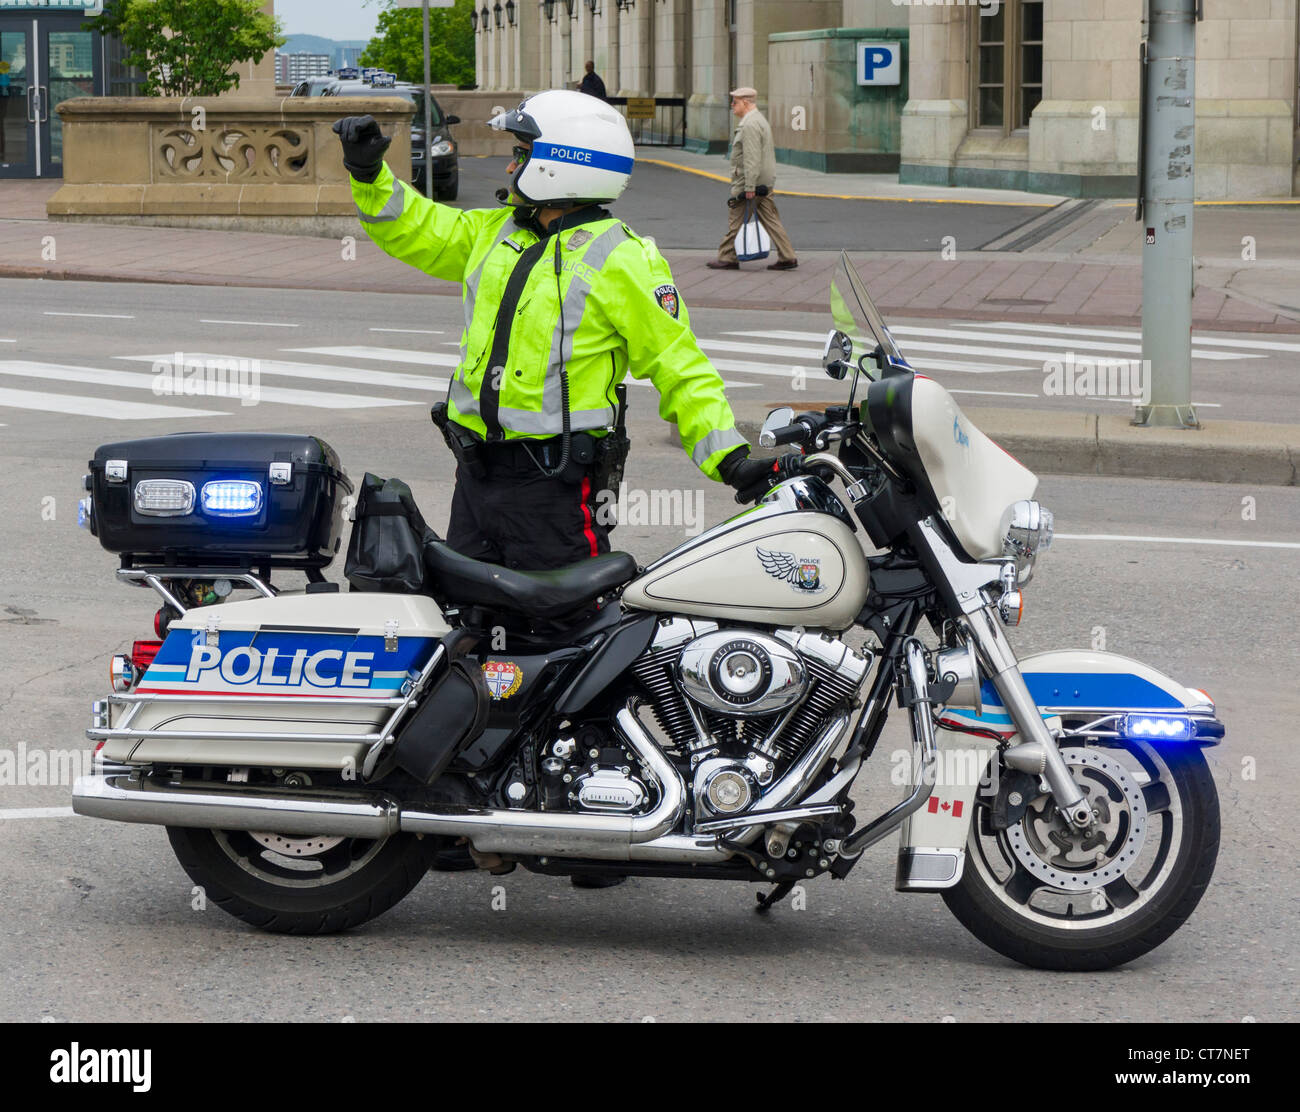 Motorcycle policeman with Harley Davidson bike in the city centre, Ottawa, Ontario, Canada Stock Photo